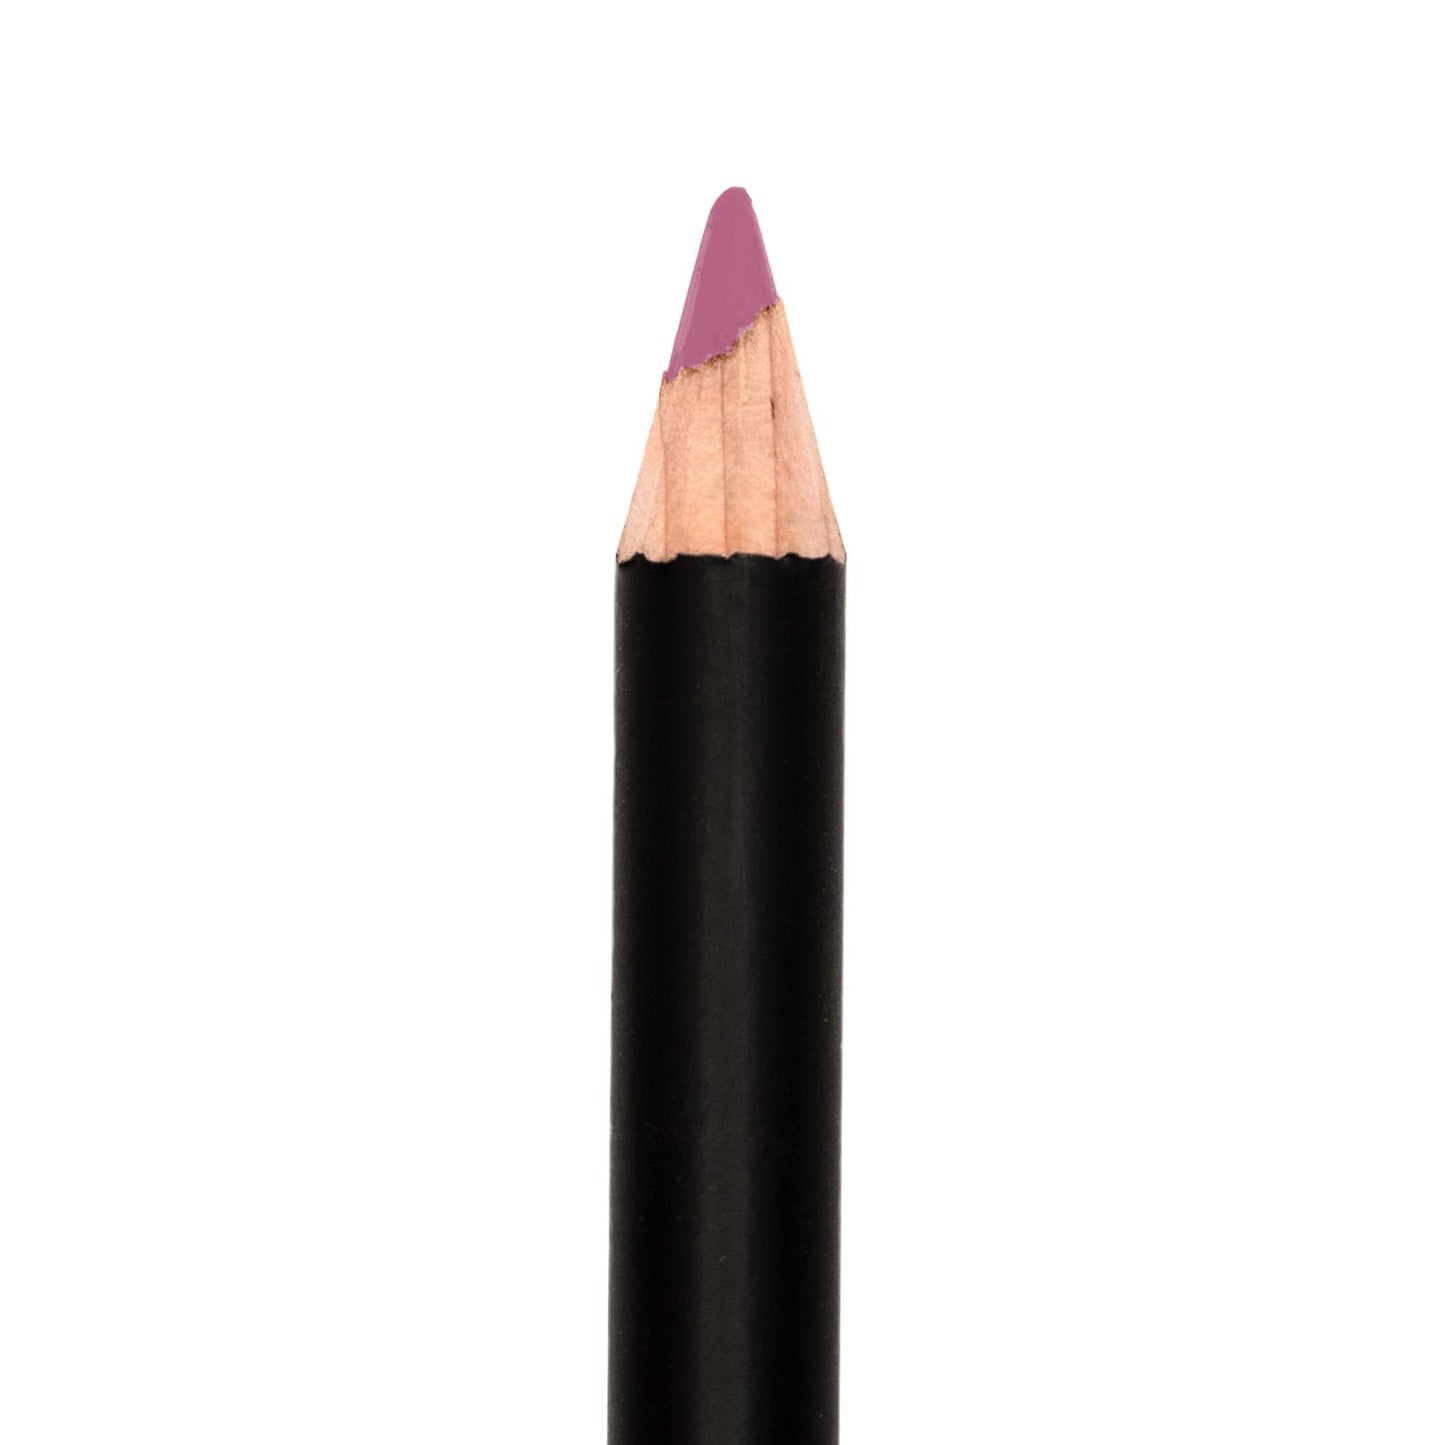 Step out with a  more pronounced smile with Cruisin Organics Glory Lip Pencil.